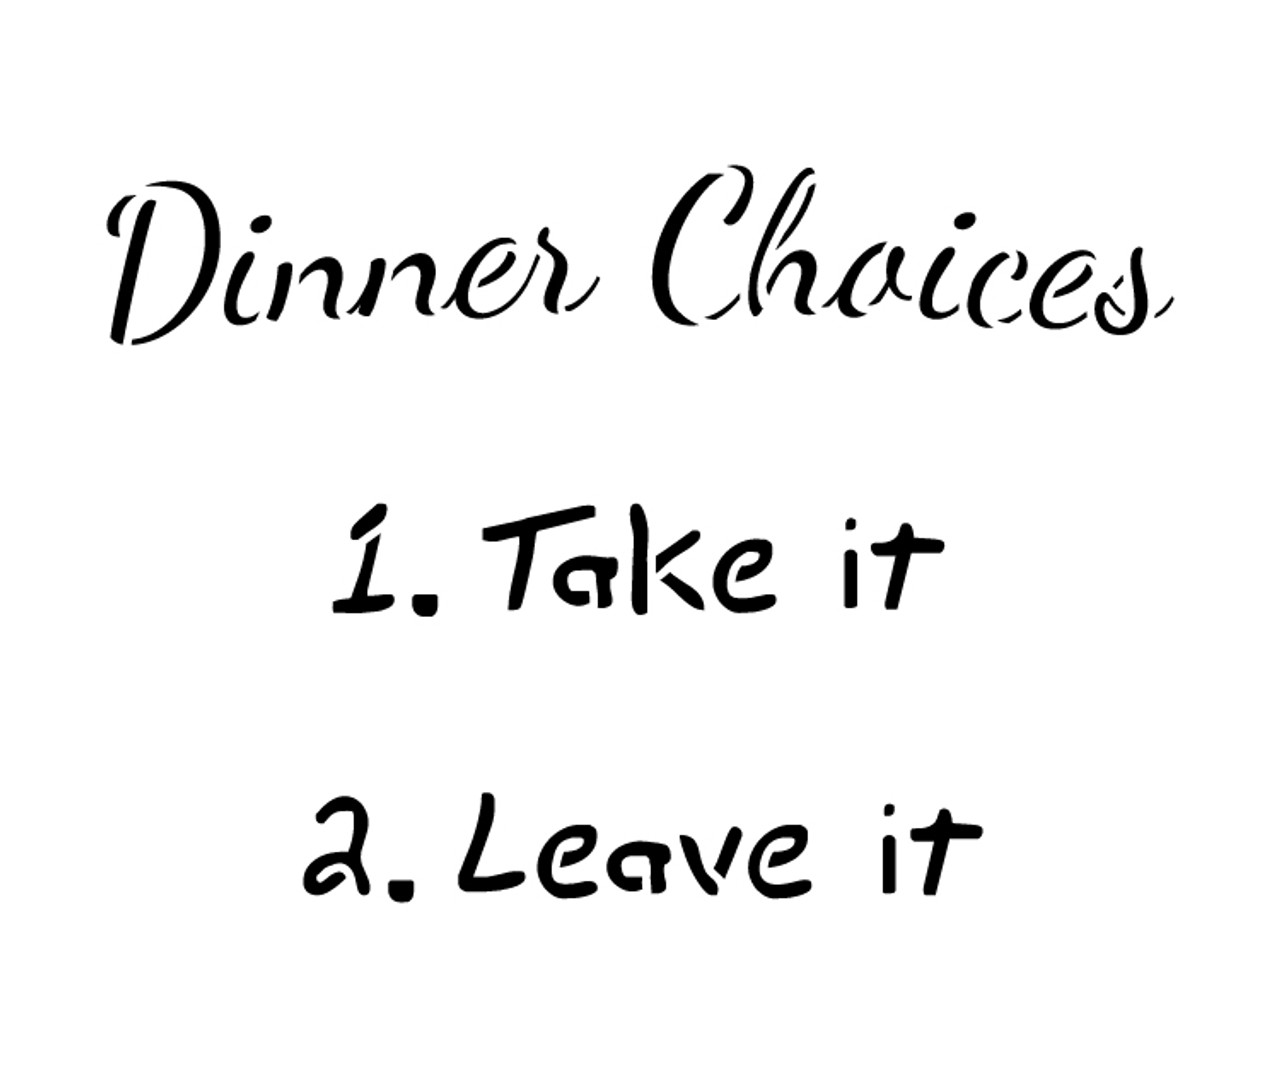 Dinner Choices - Word Stencil - 13" x 10" - STCL1341_3 by StudioR12